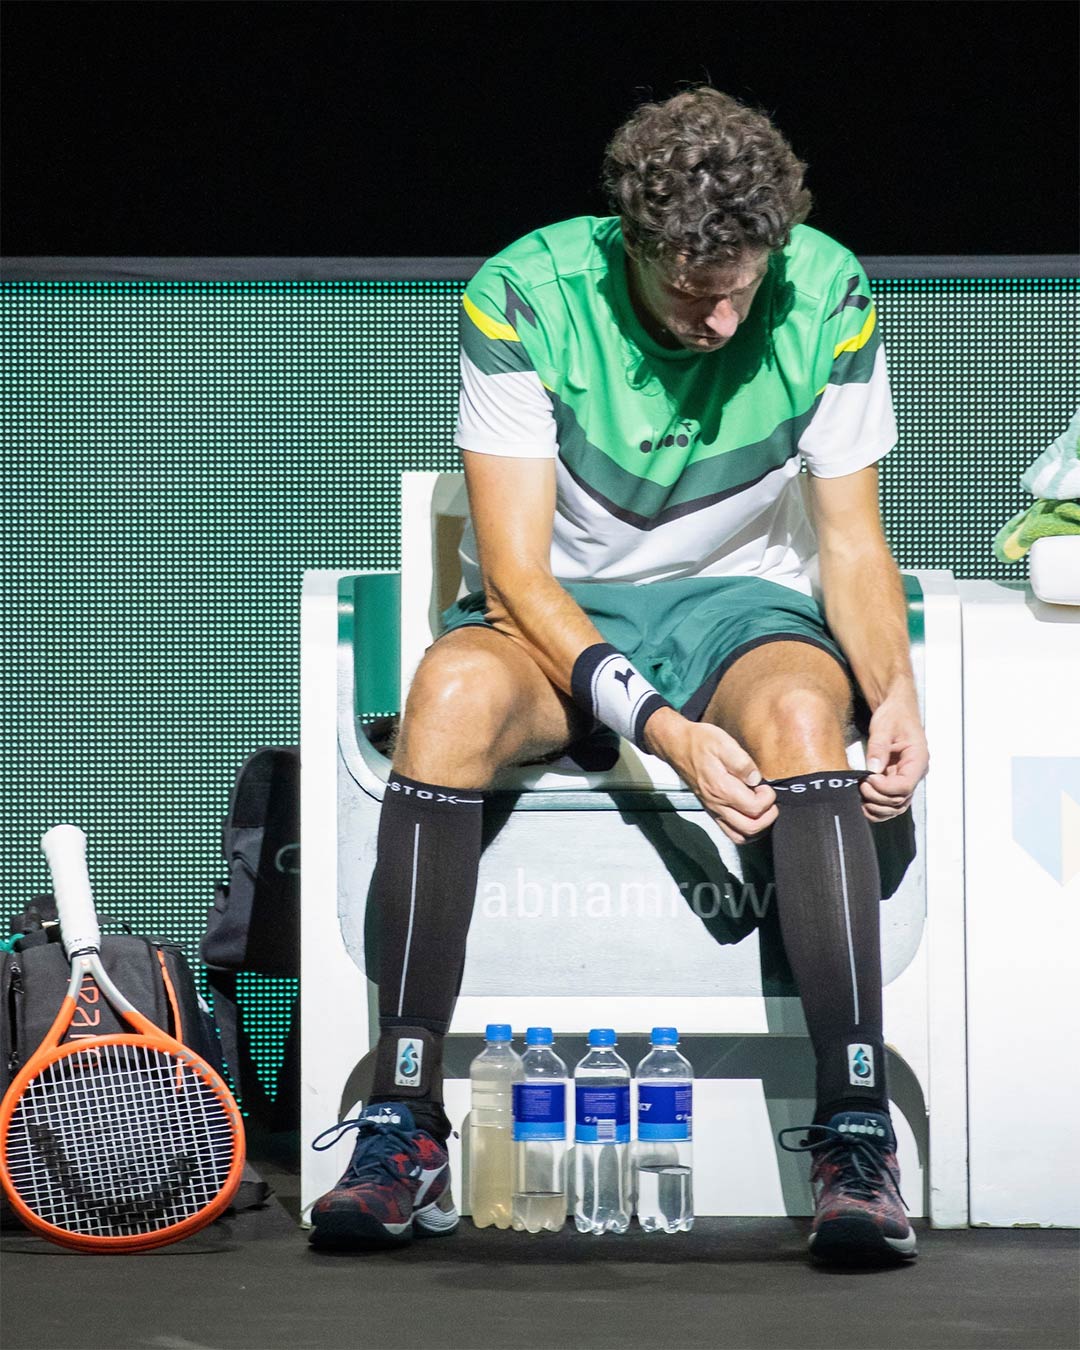 Robin Haase sitting courtside and pulling up his sock.